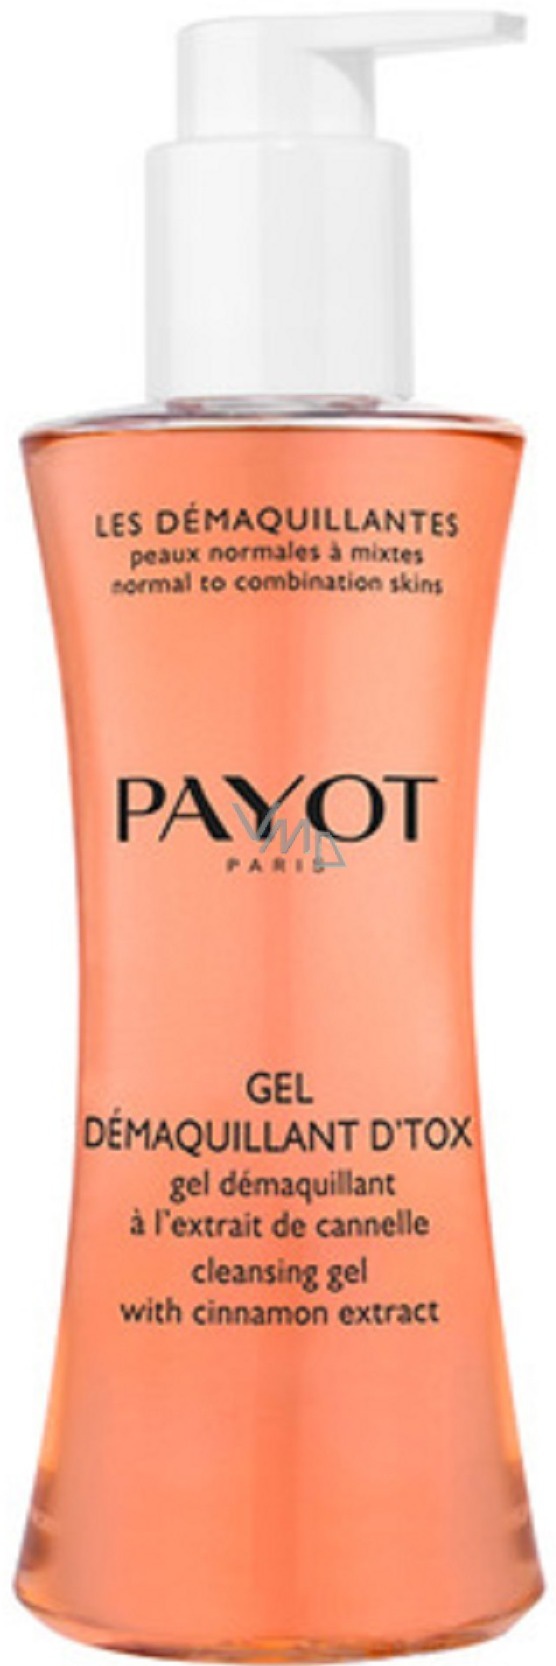 Payot Gel Démaquillant D’tox